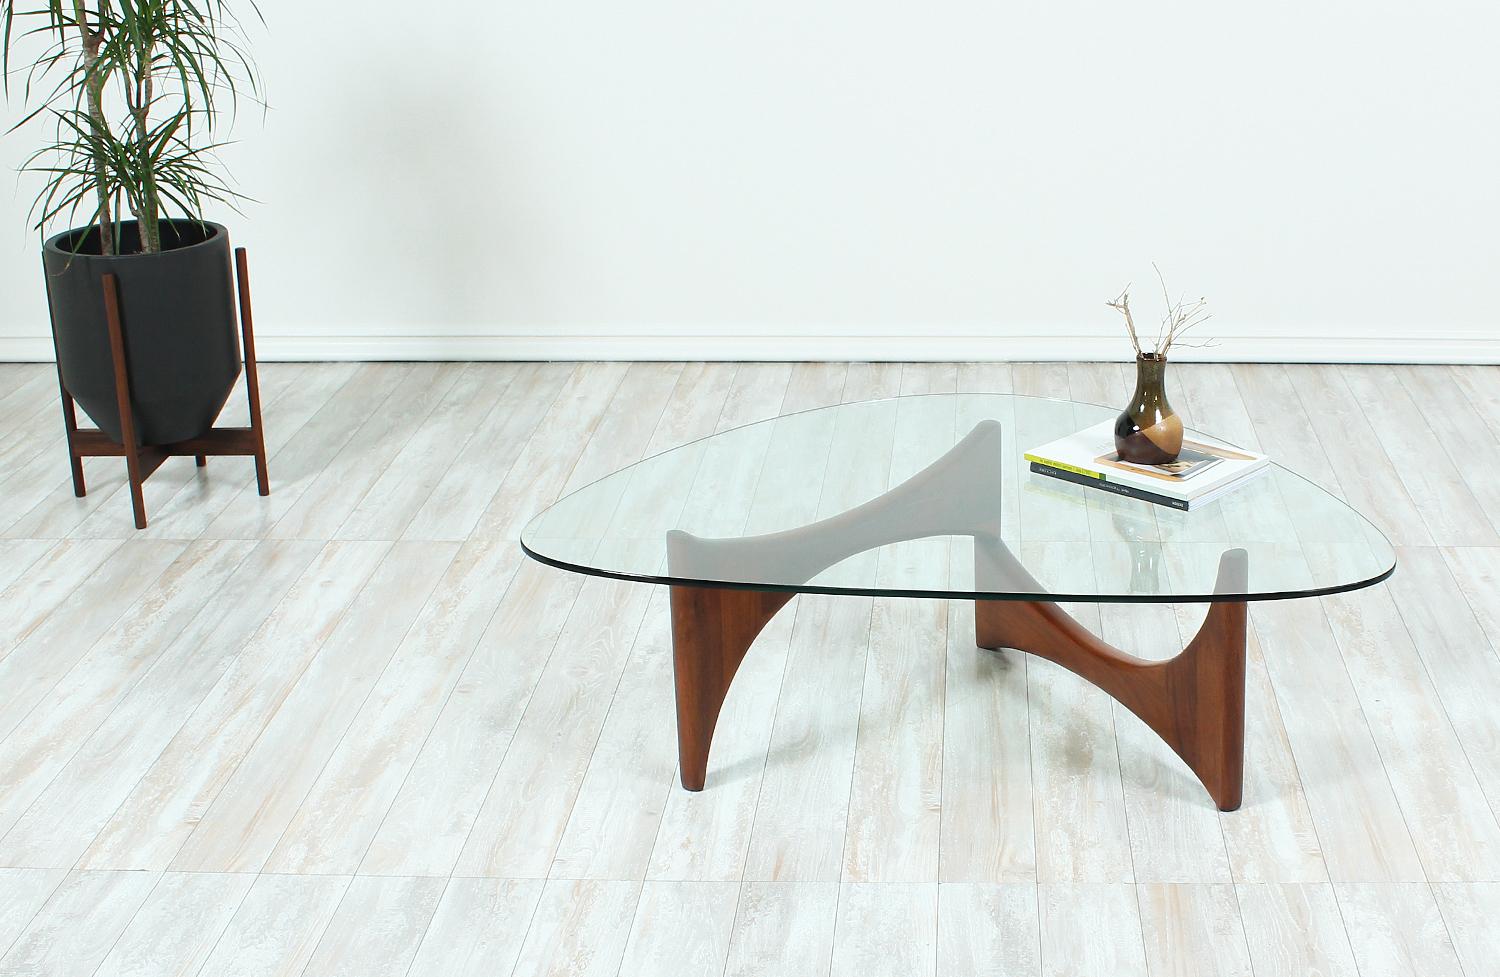 Elegant coffee table designed by Adrian Pearsall for Craft Associates in the United States circa 1960s. This design features a new triangular-shaped glass top with rounded edges that sits over the sculptural walnut wood base. The base rotates and